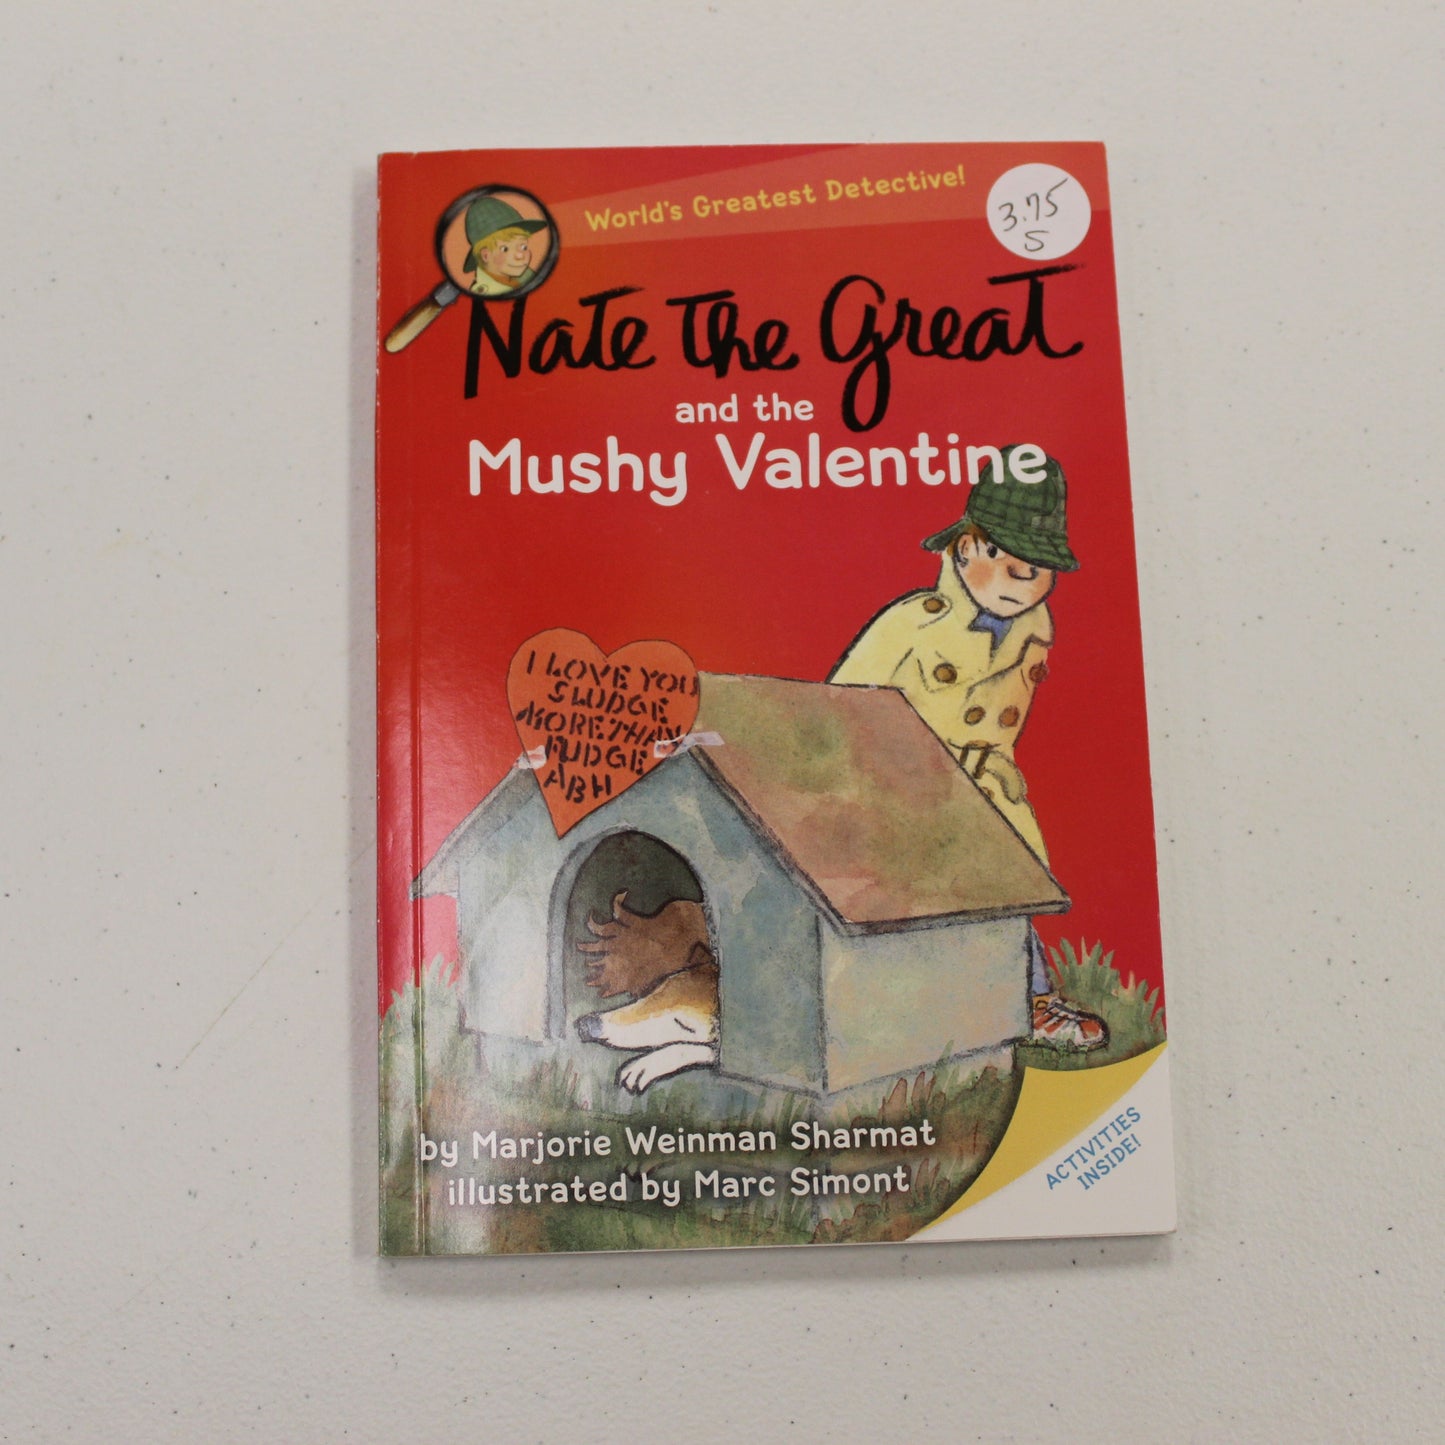 NATE THE GREAT AND THE MUSHY VALENTINE